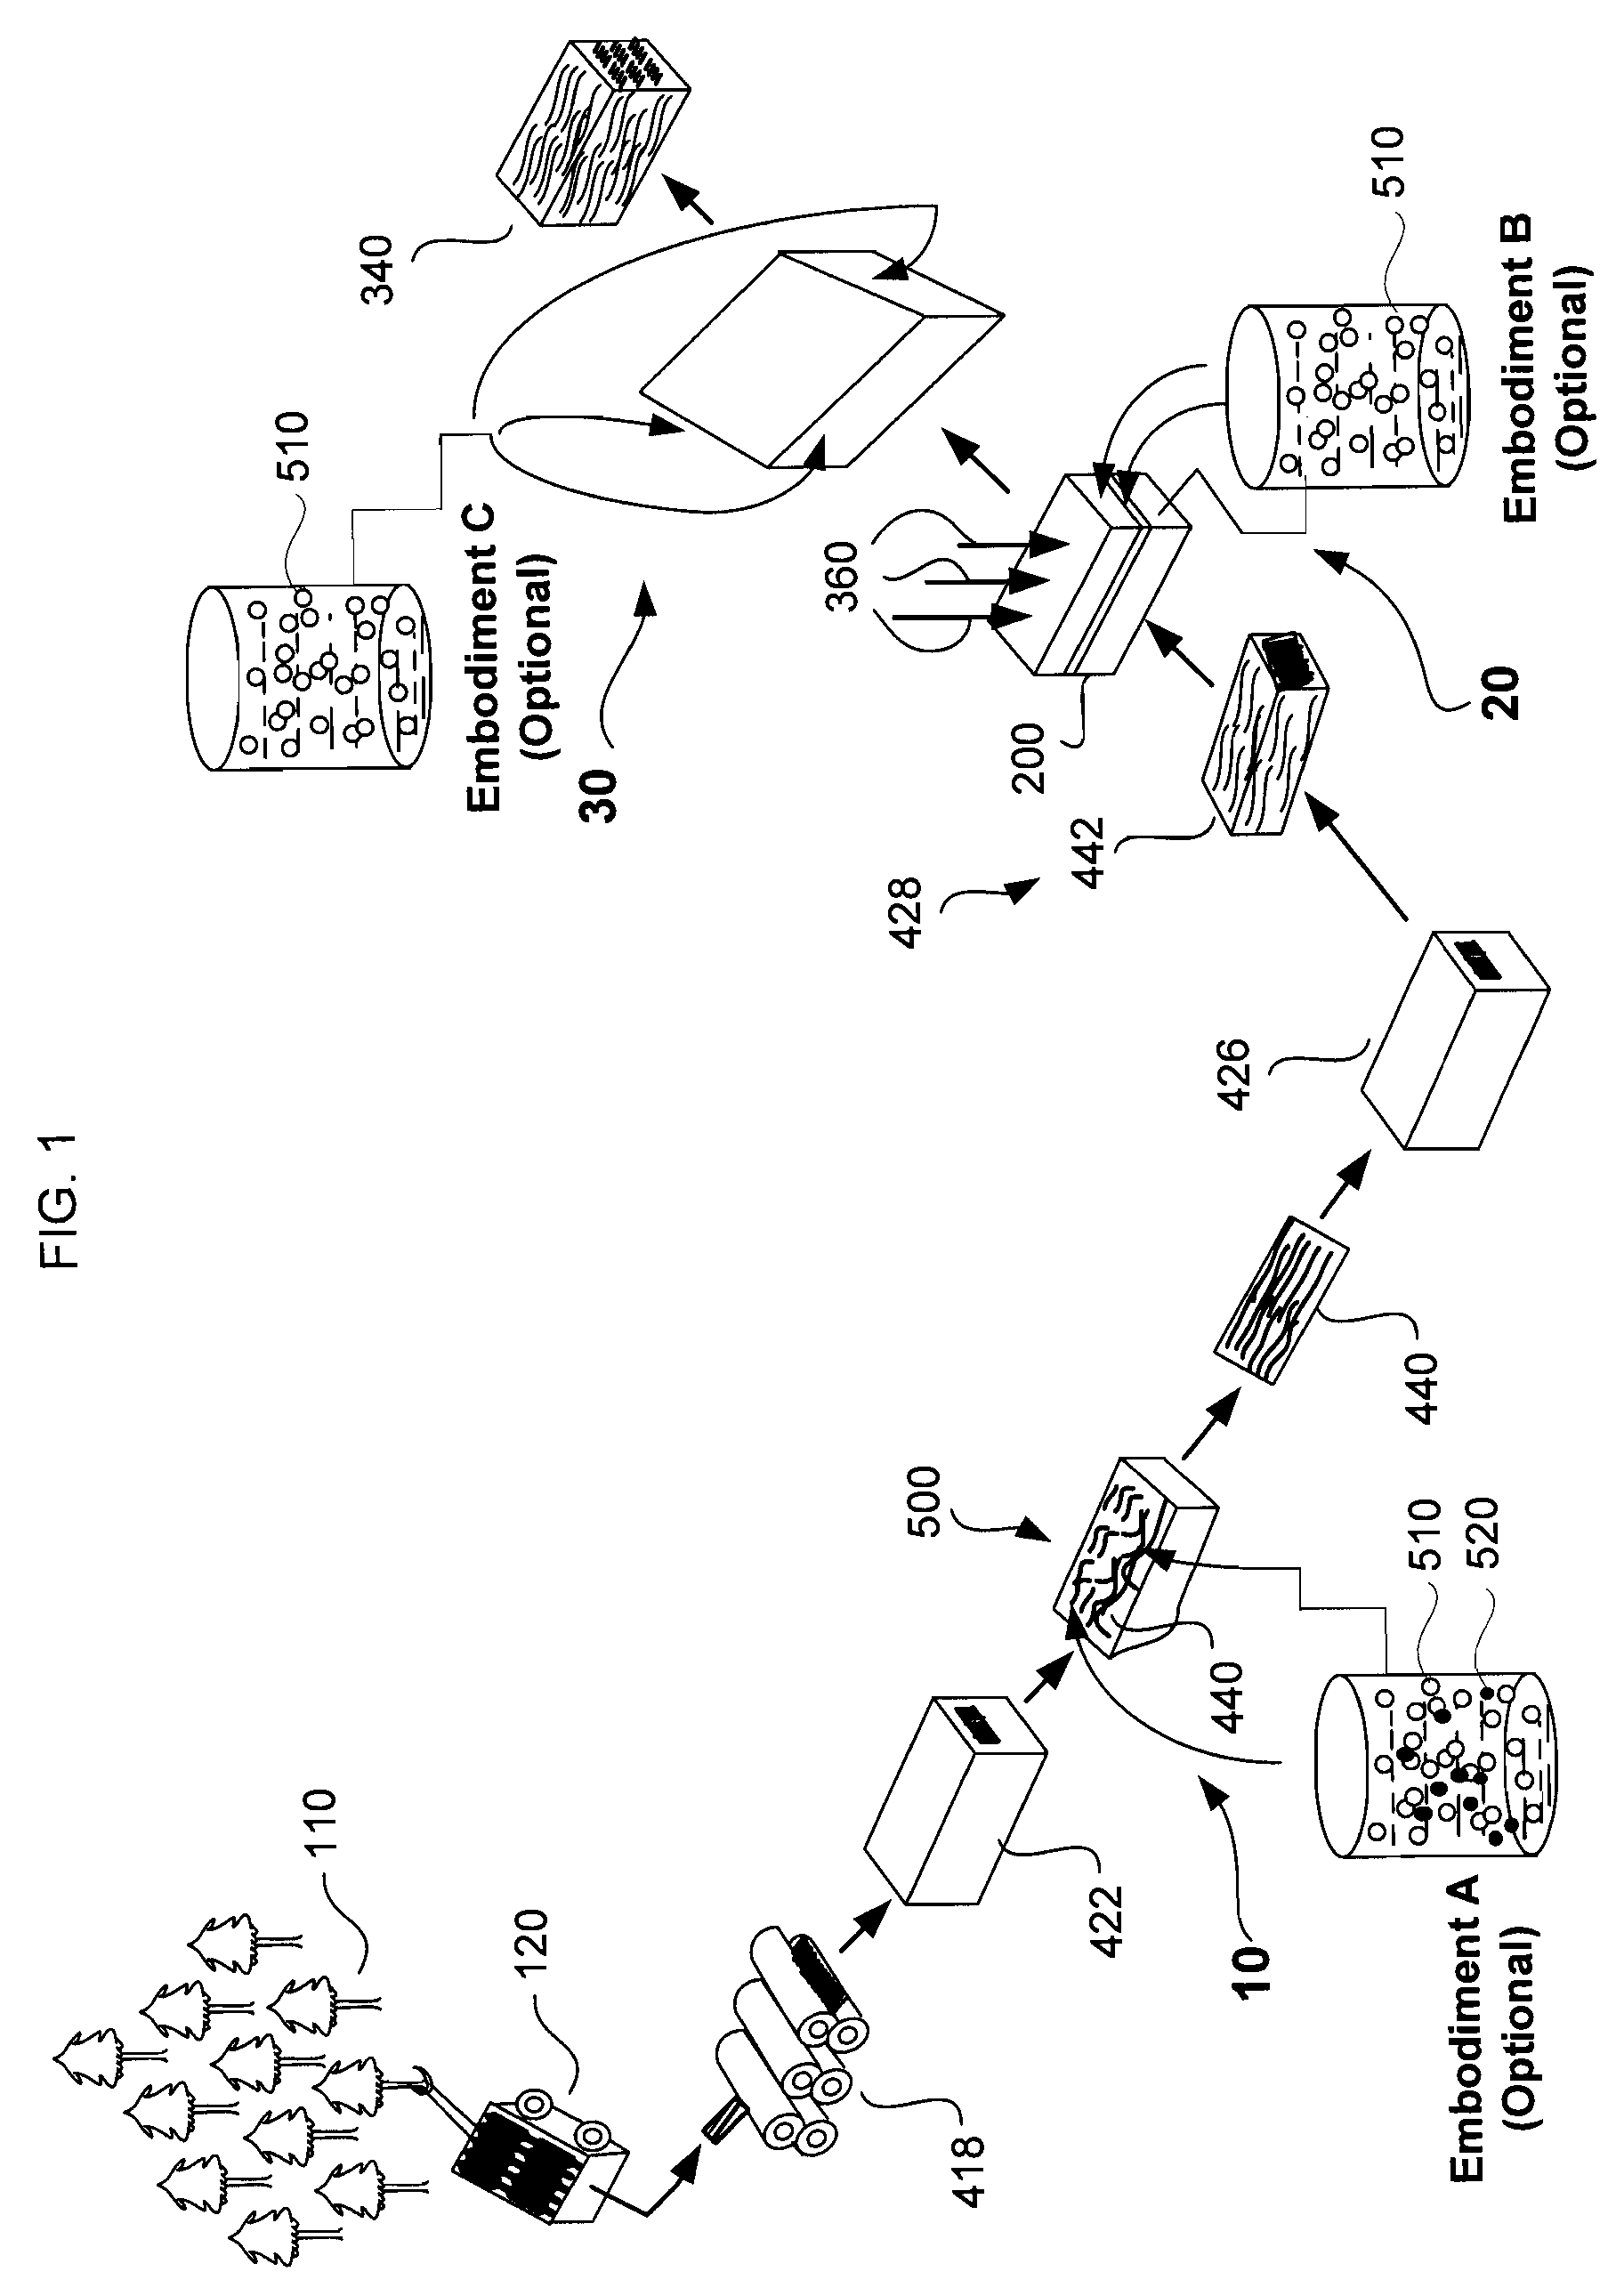 System and method for the preservative treatment of engineered wood products